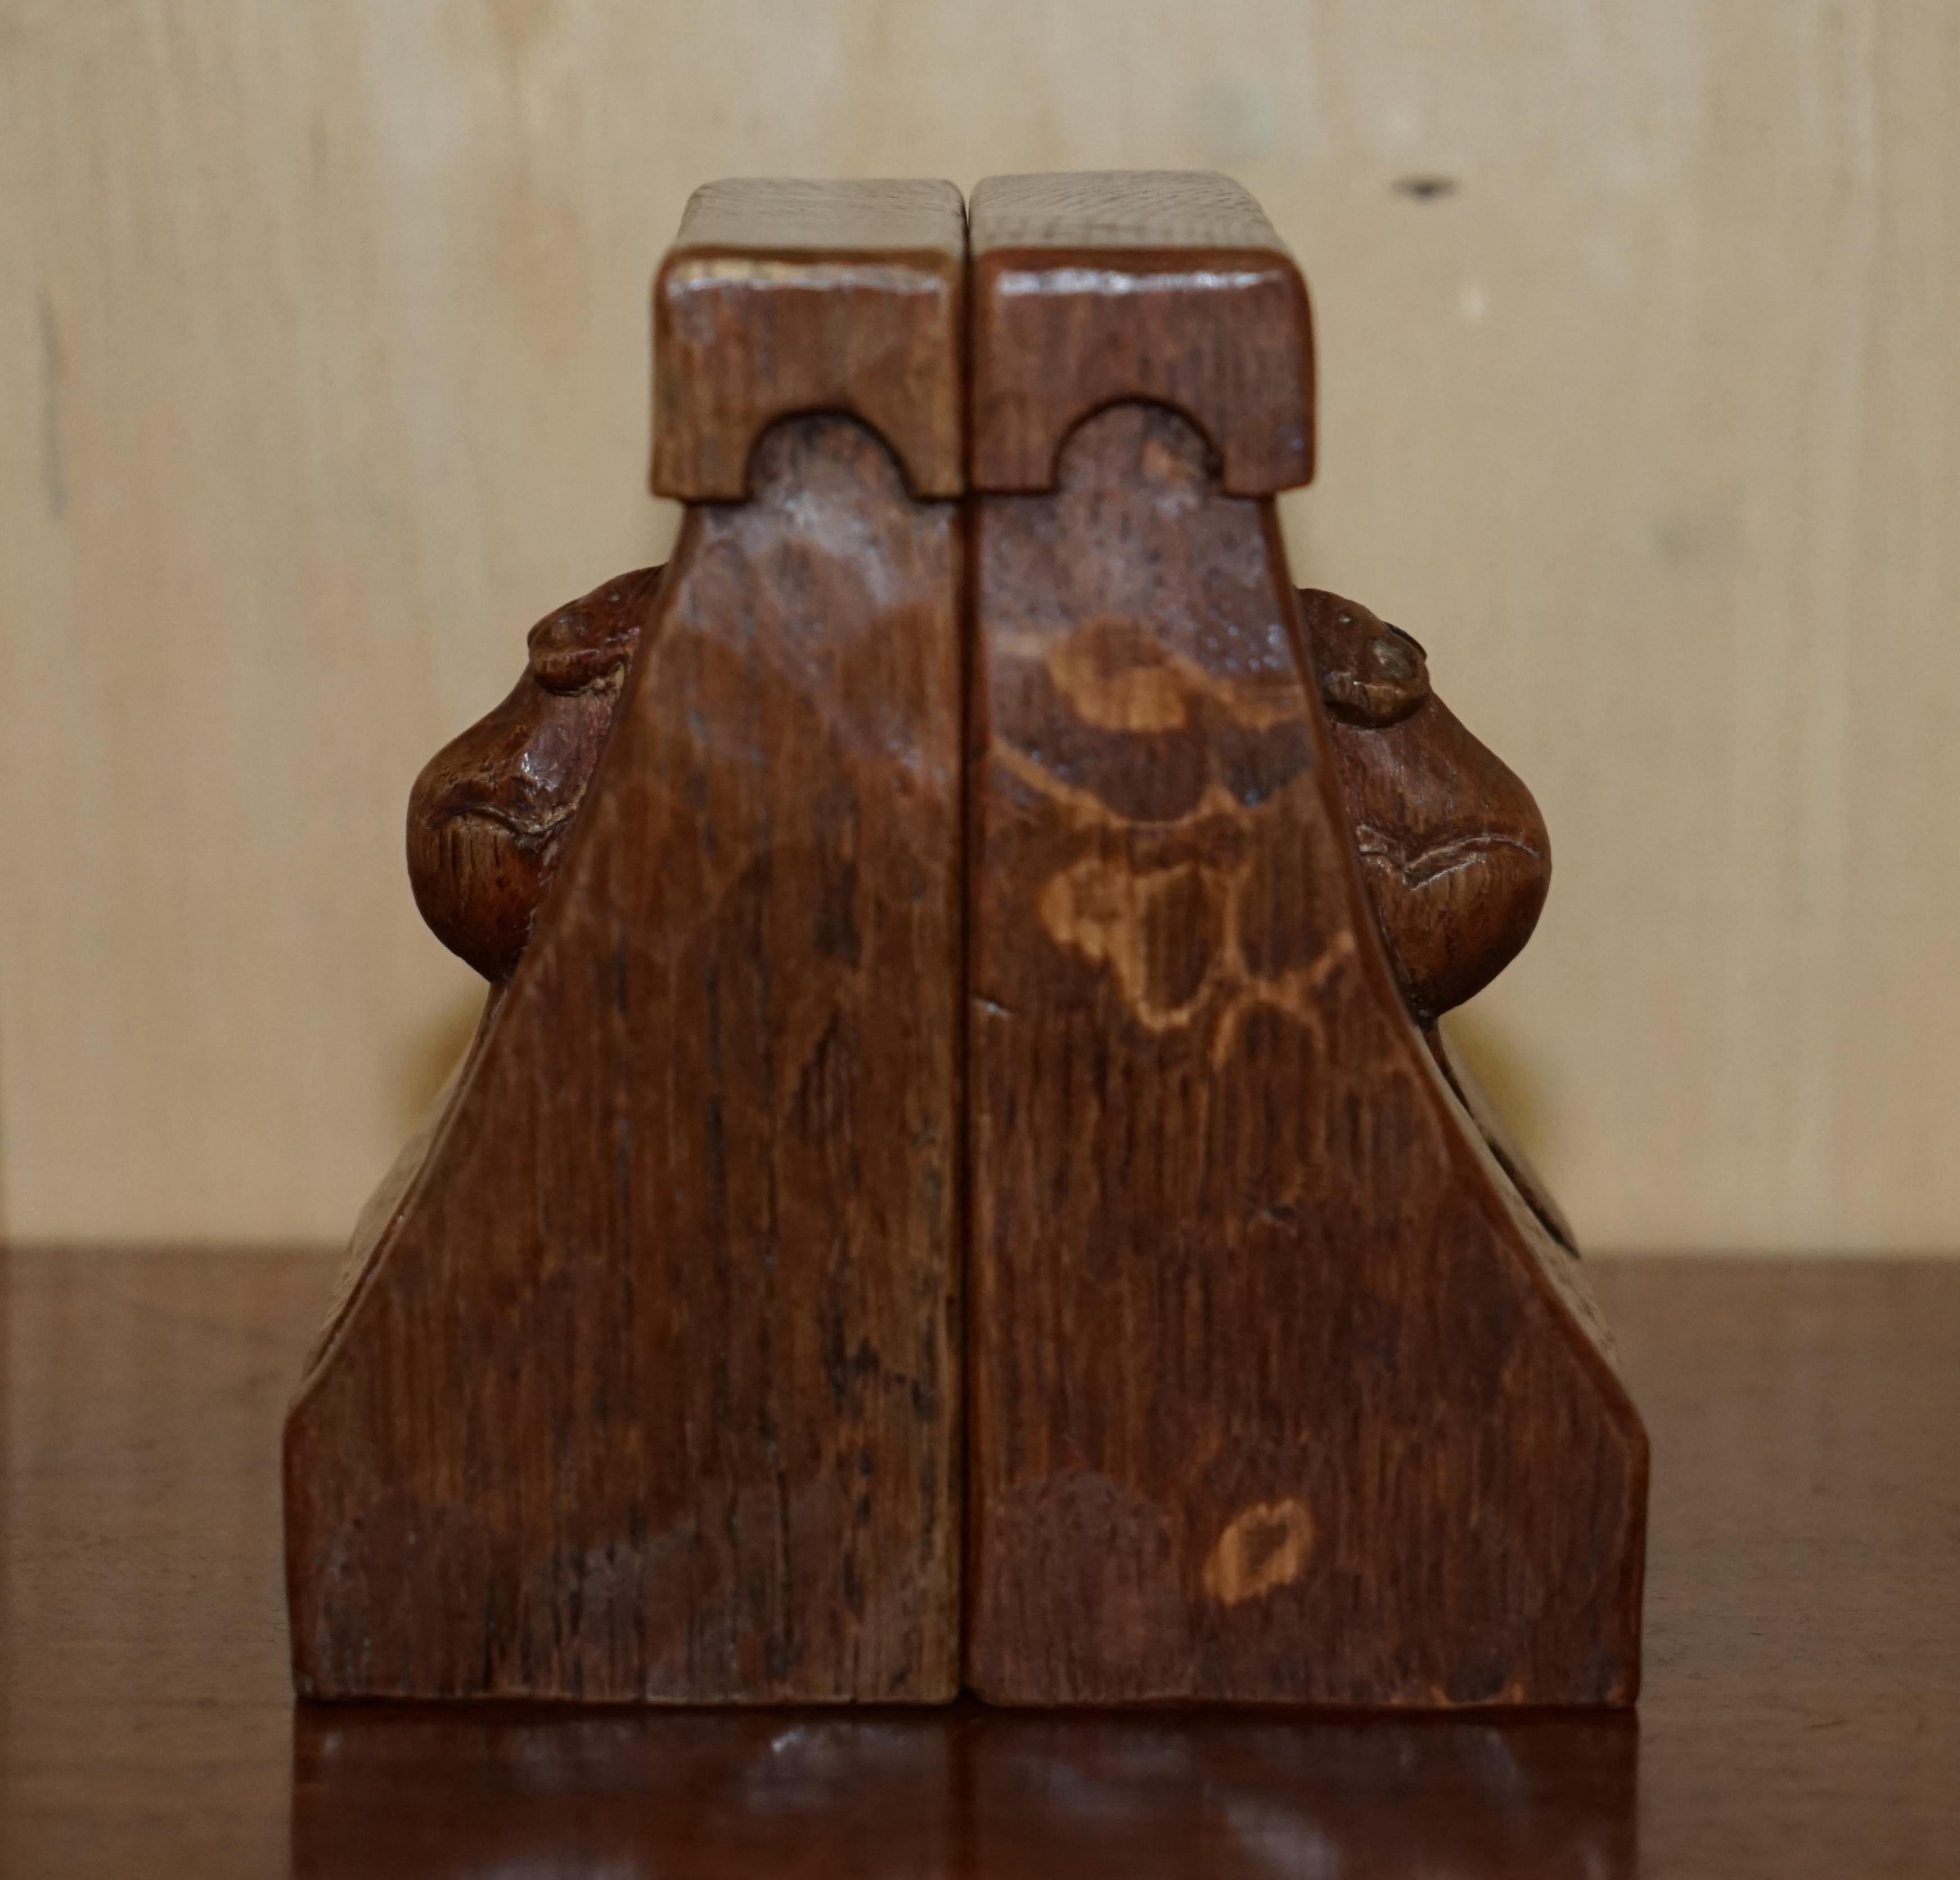 We are delighted to offer for sale this extremely collectable pair of 1930's Robert Mouseman Thompson mice bookends 

A truly mouth-wateringly beautiful pair, mouseman furniture is super super collectable, these 1930's example bookends are more